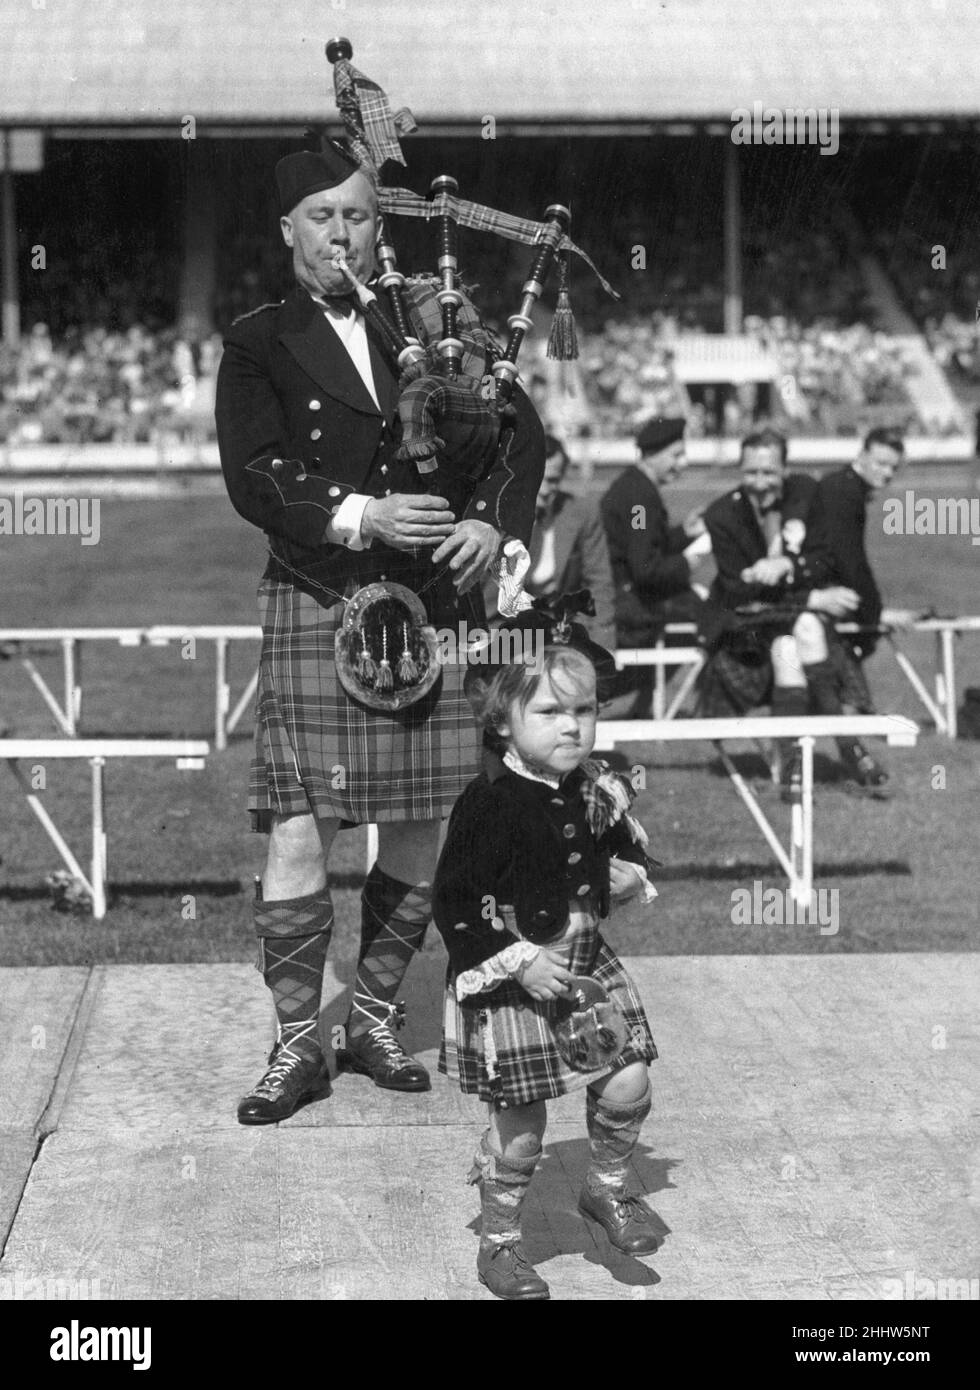 Young Heather Gibb dressed in traditional Scottish tartan costume, entertains the crowd with a dancing routine accompanying a man playing the bagpipes at White City, London. 14th May 1950. Stock Photo